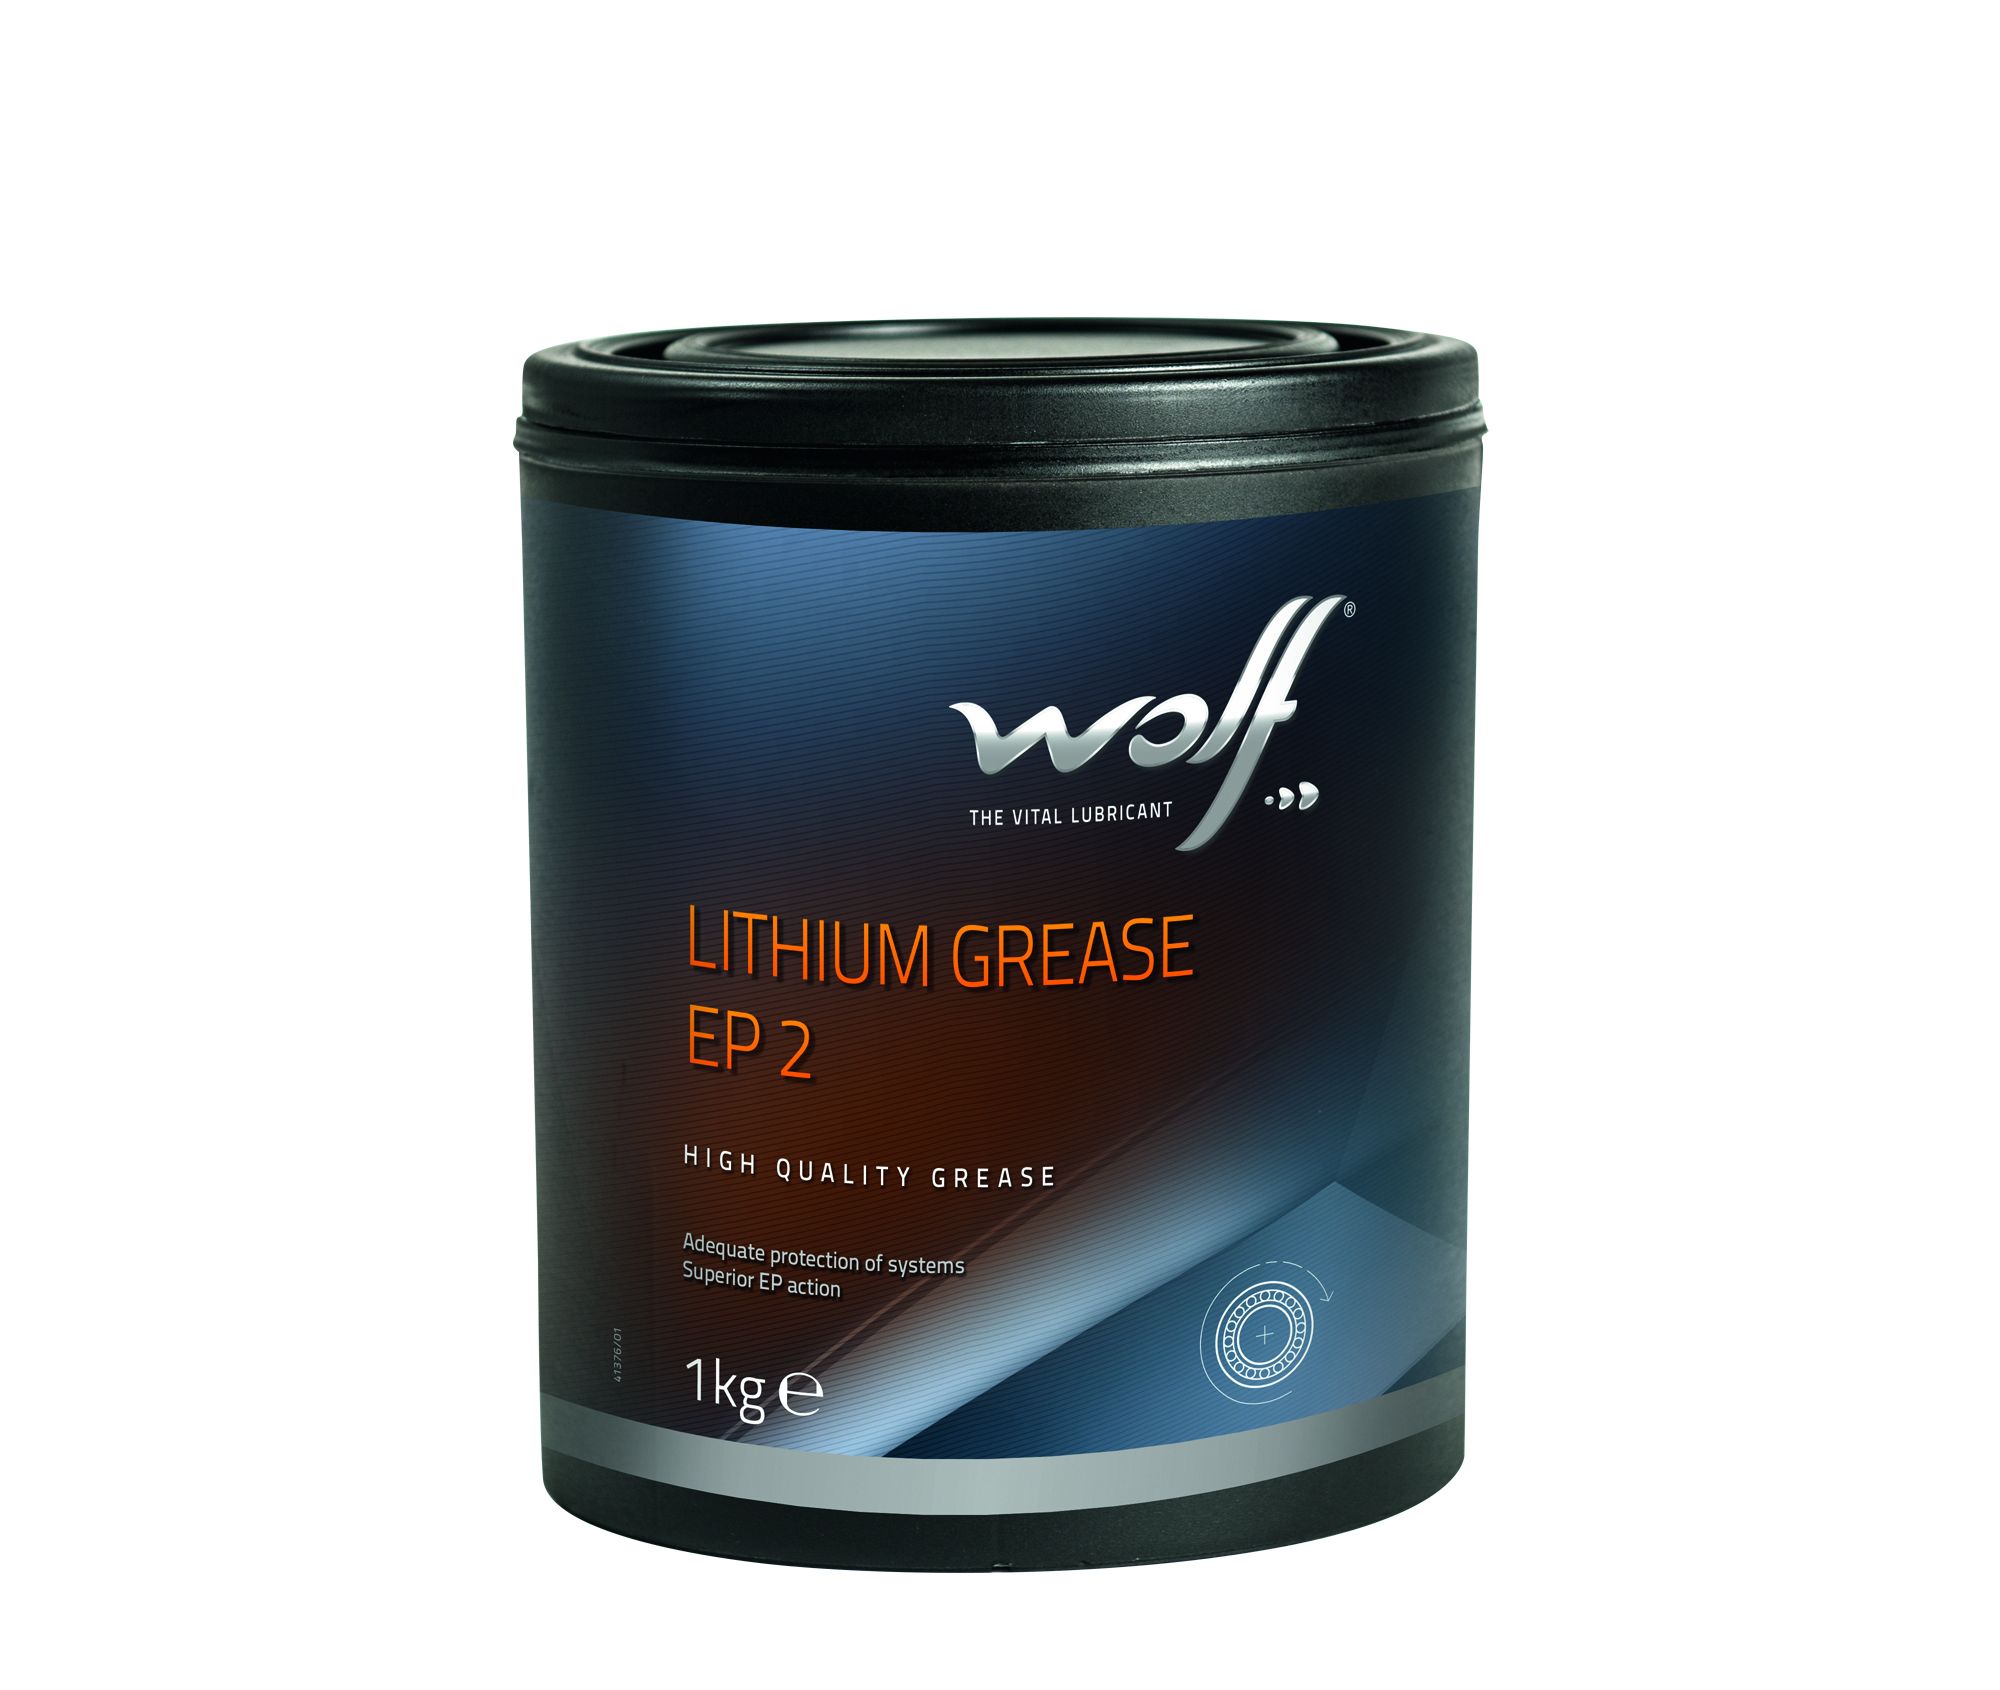 Wolf lithium grease ep 2